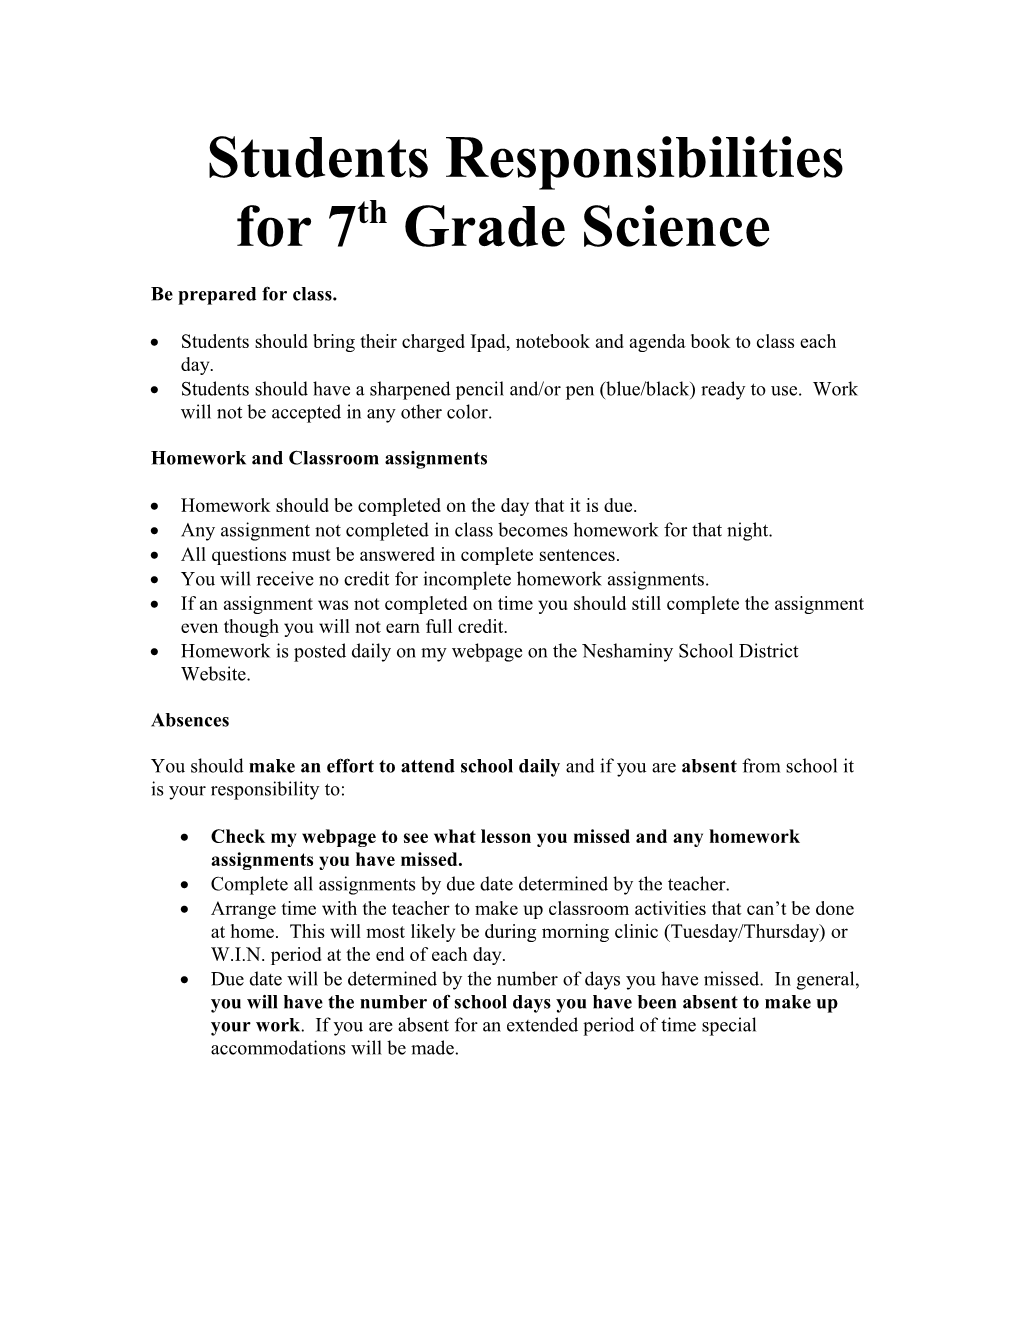 Students Responsibilities in Science Class